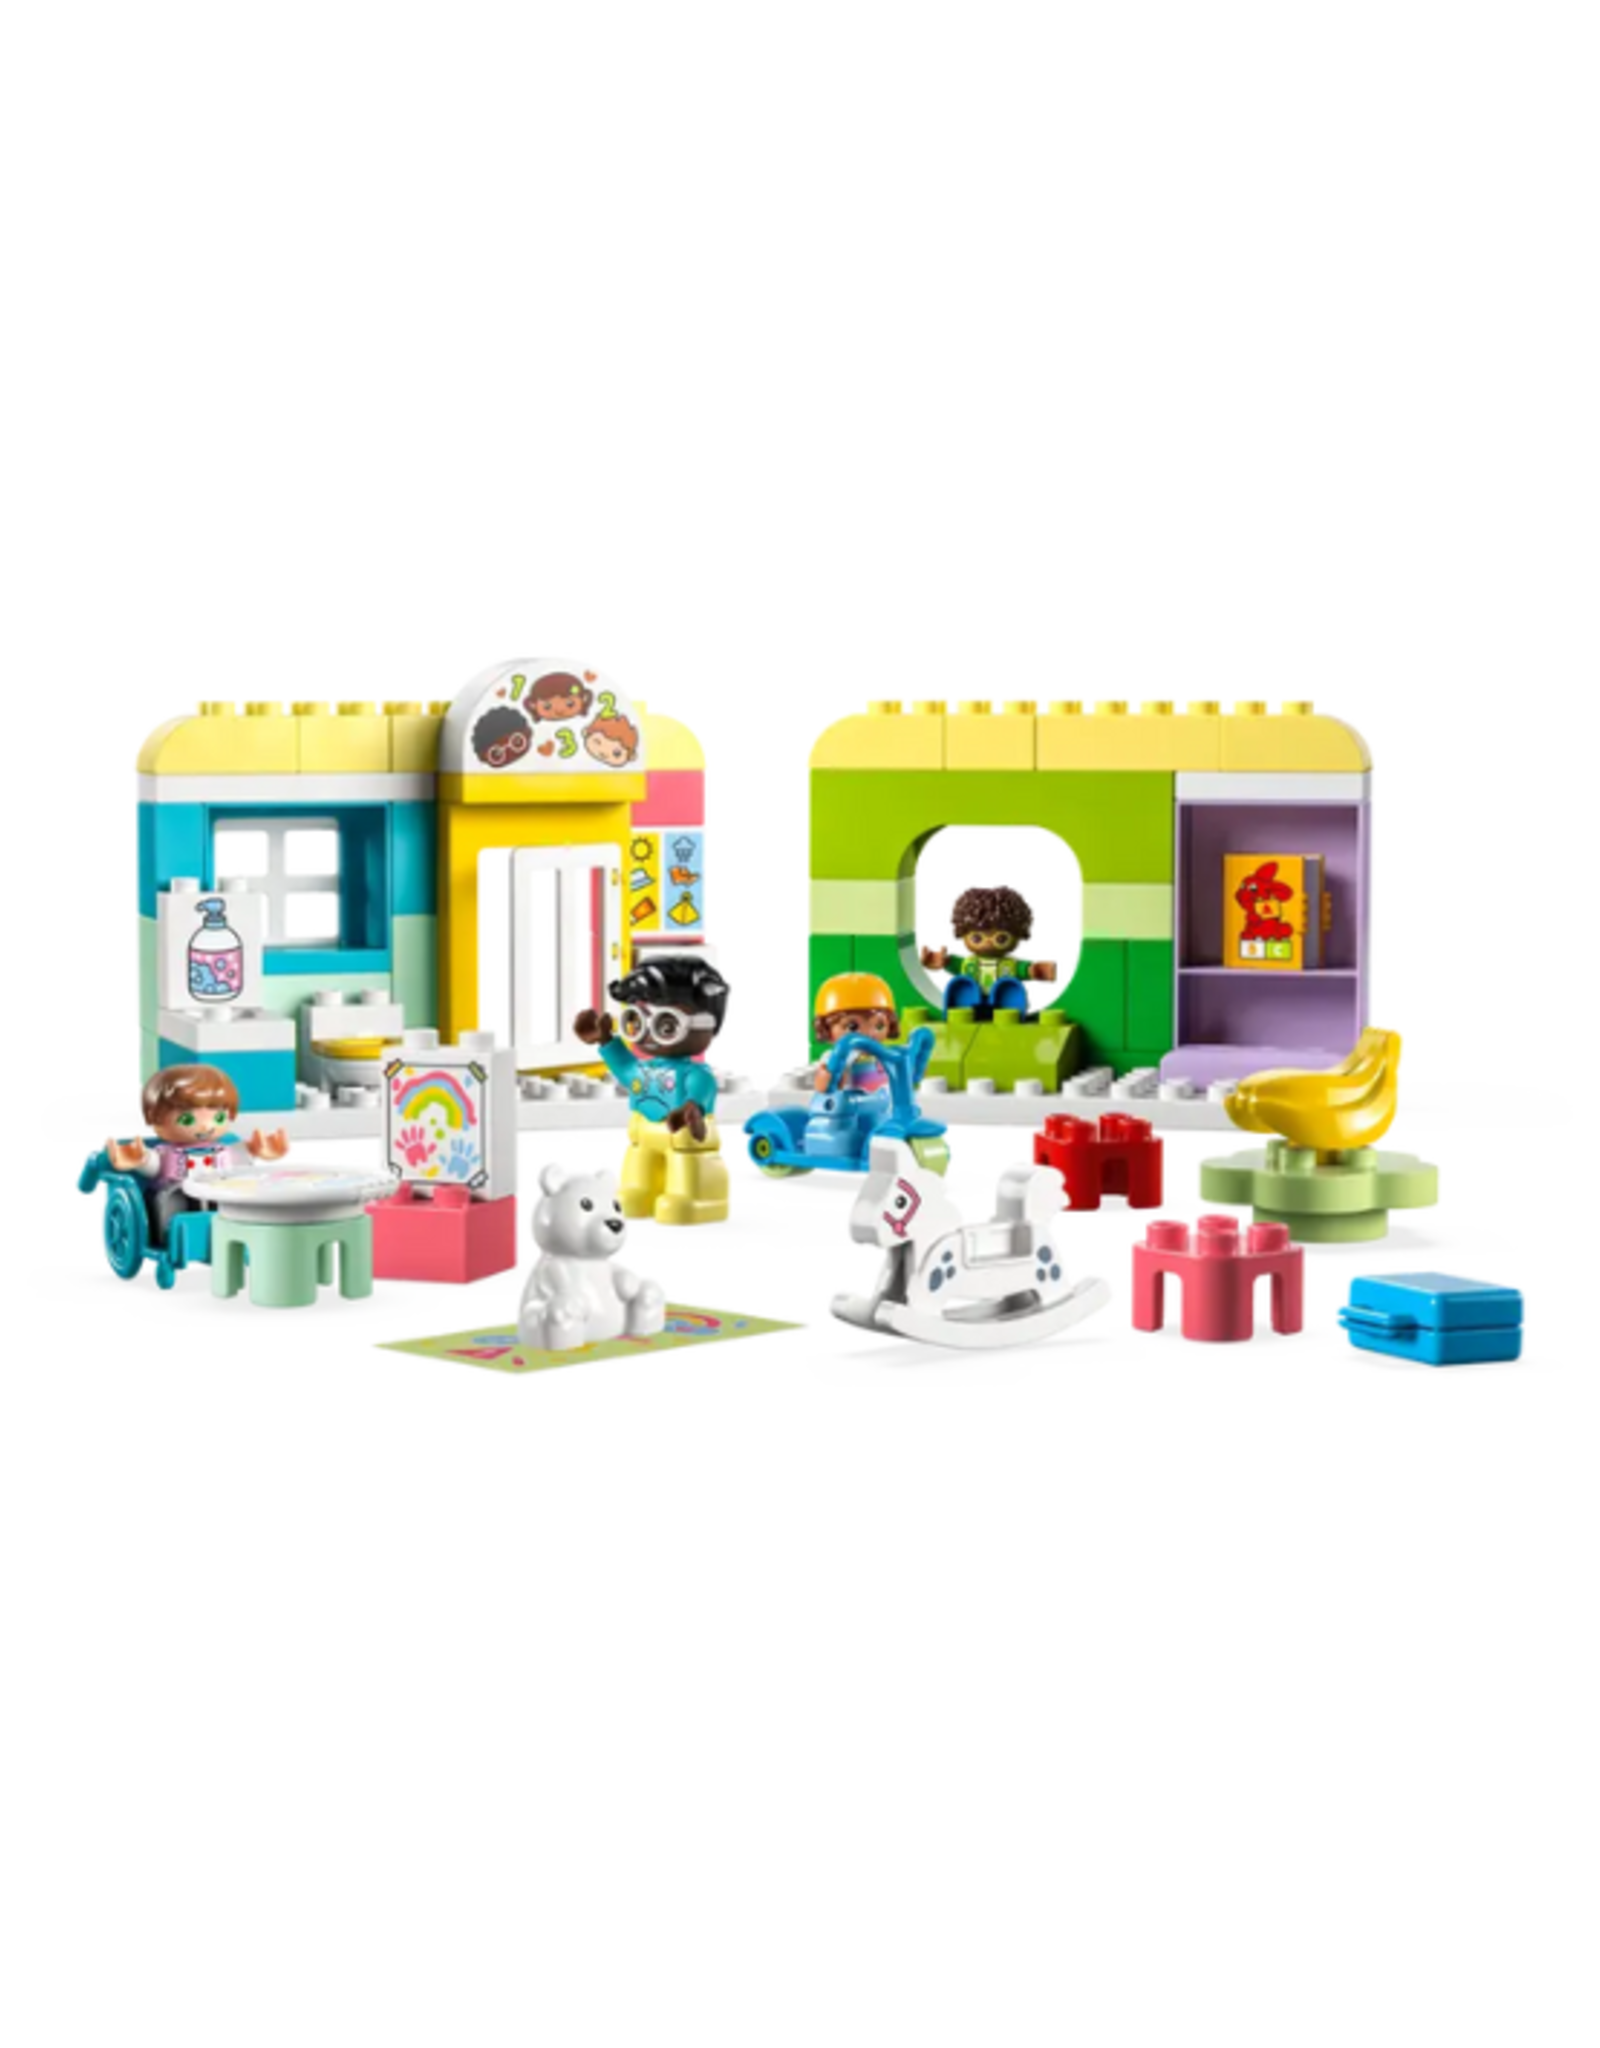 Lego Lego - Duplo - 10992 - Life At The Day-Care Center